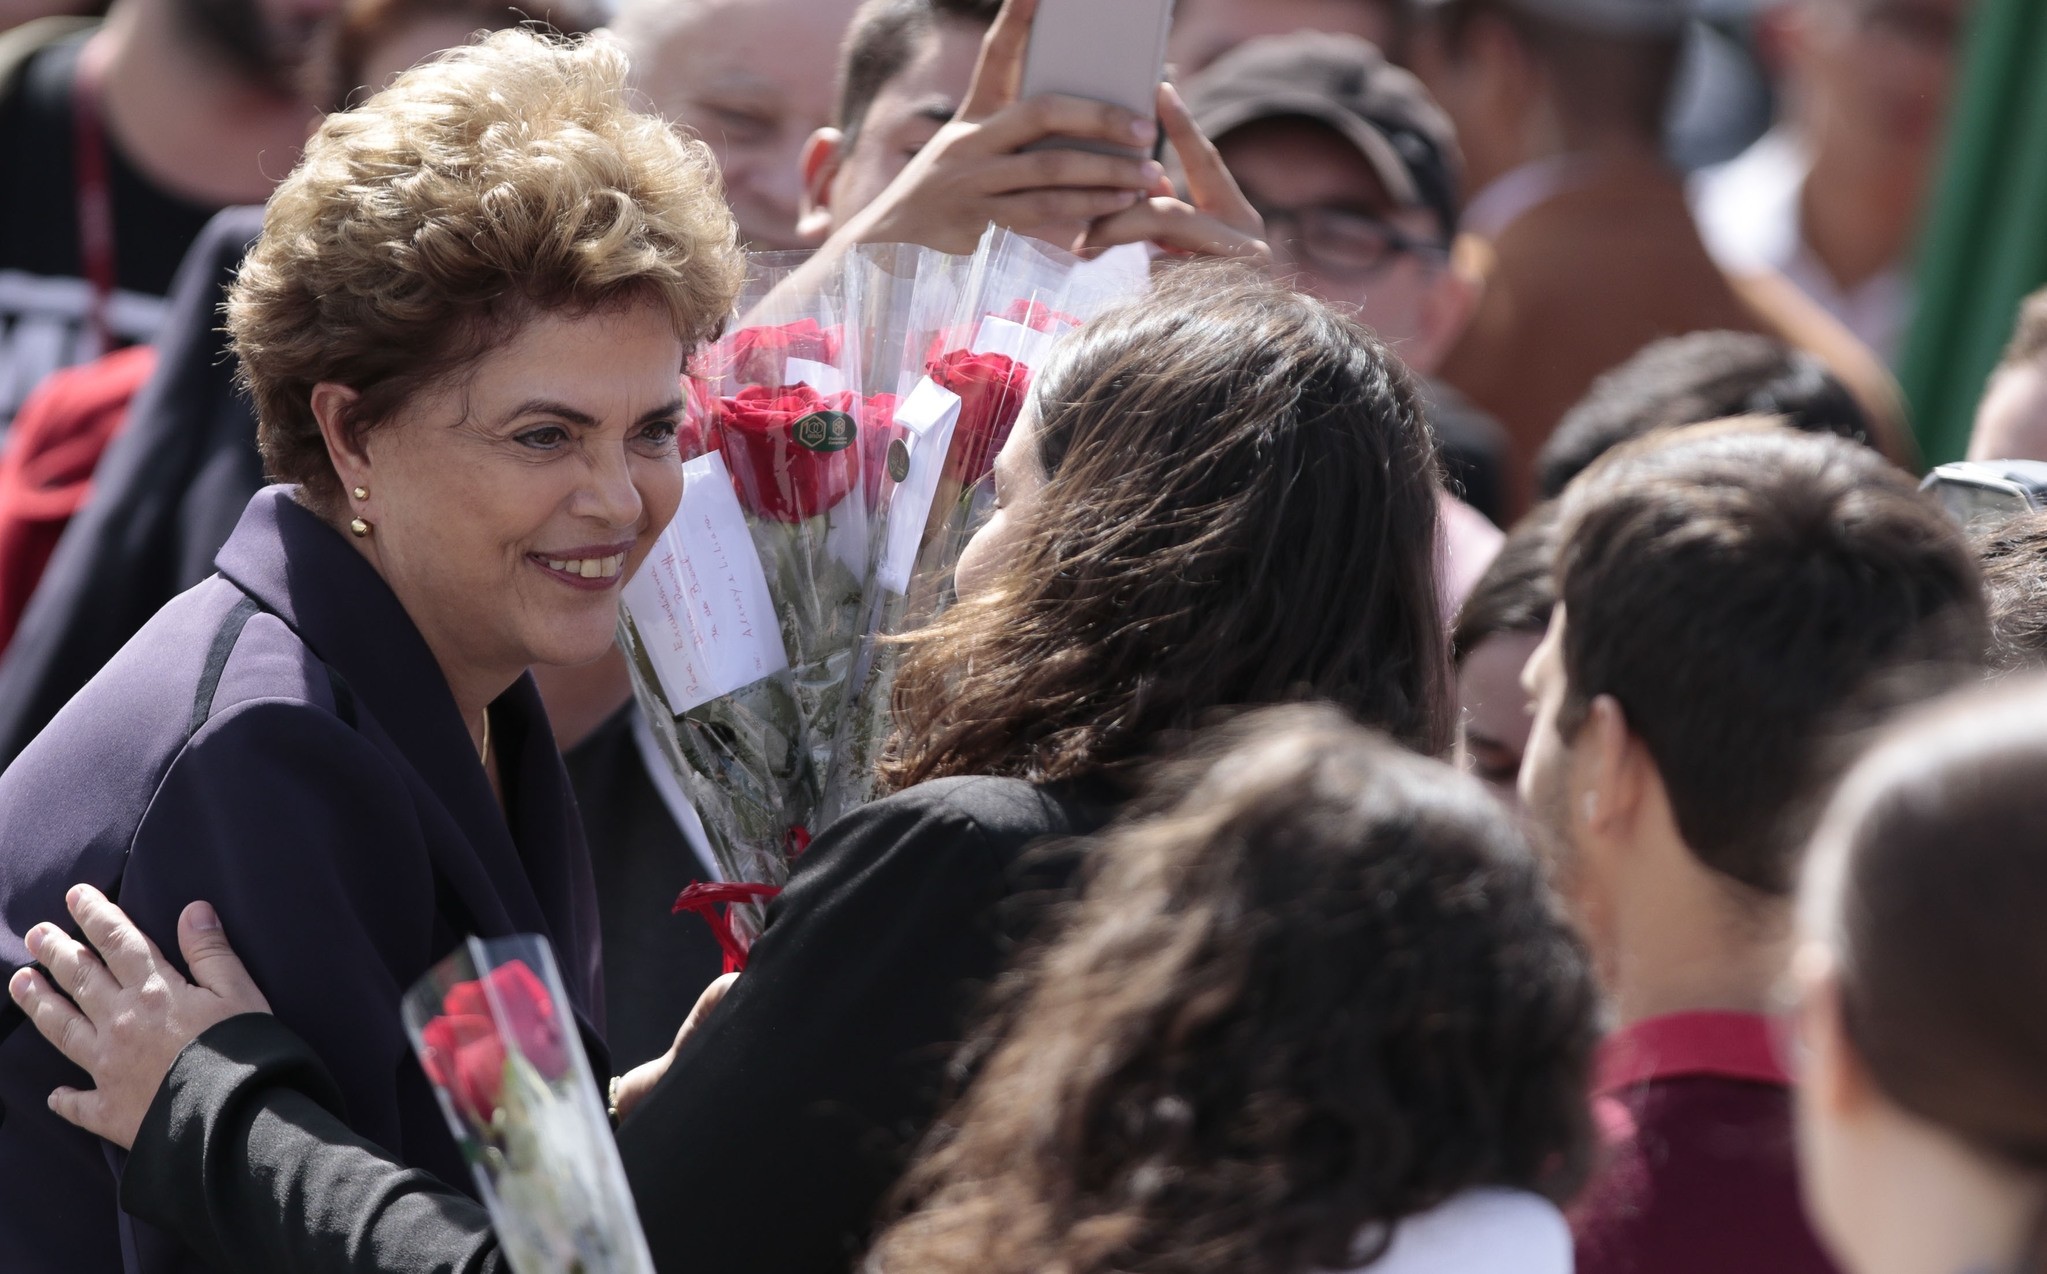 Brazilian suspended President Dilma Rousseff (L) greets workers during her visit to the construction site of Sirius in Campinas, Sao Paulo, Brazil on June 9, 2016. (AFP Photo)